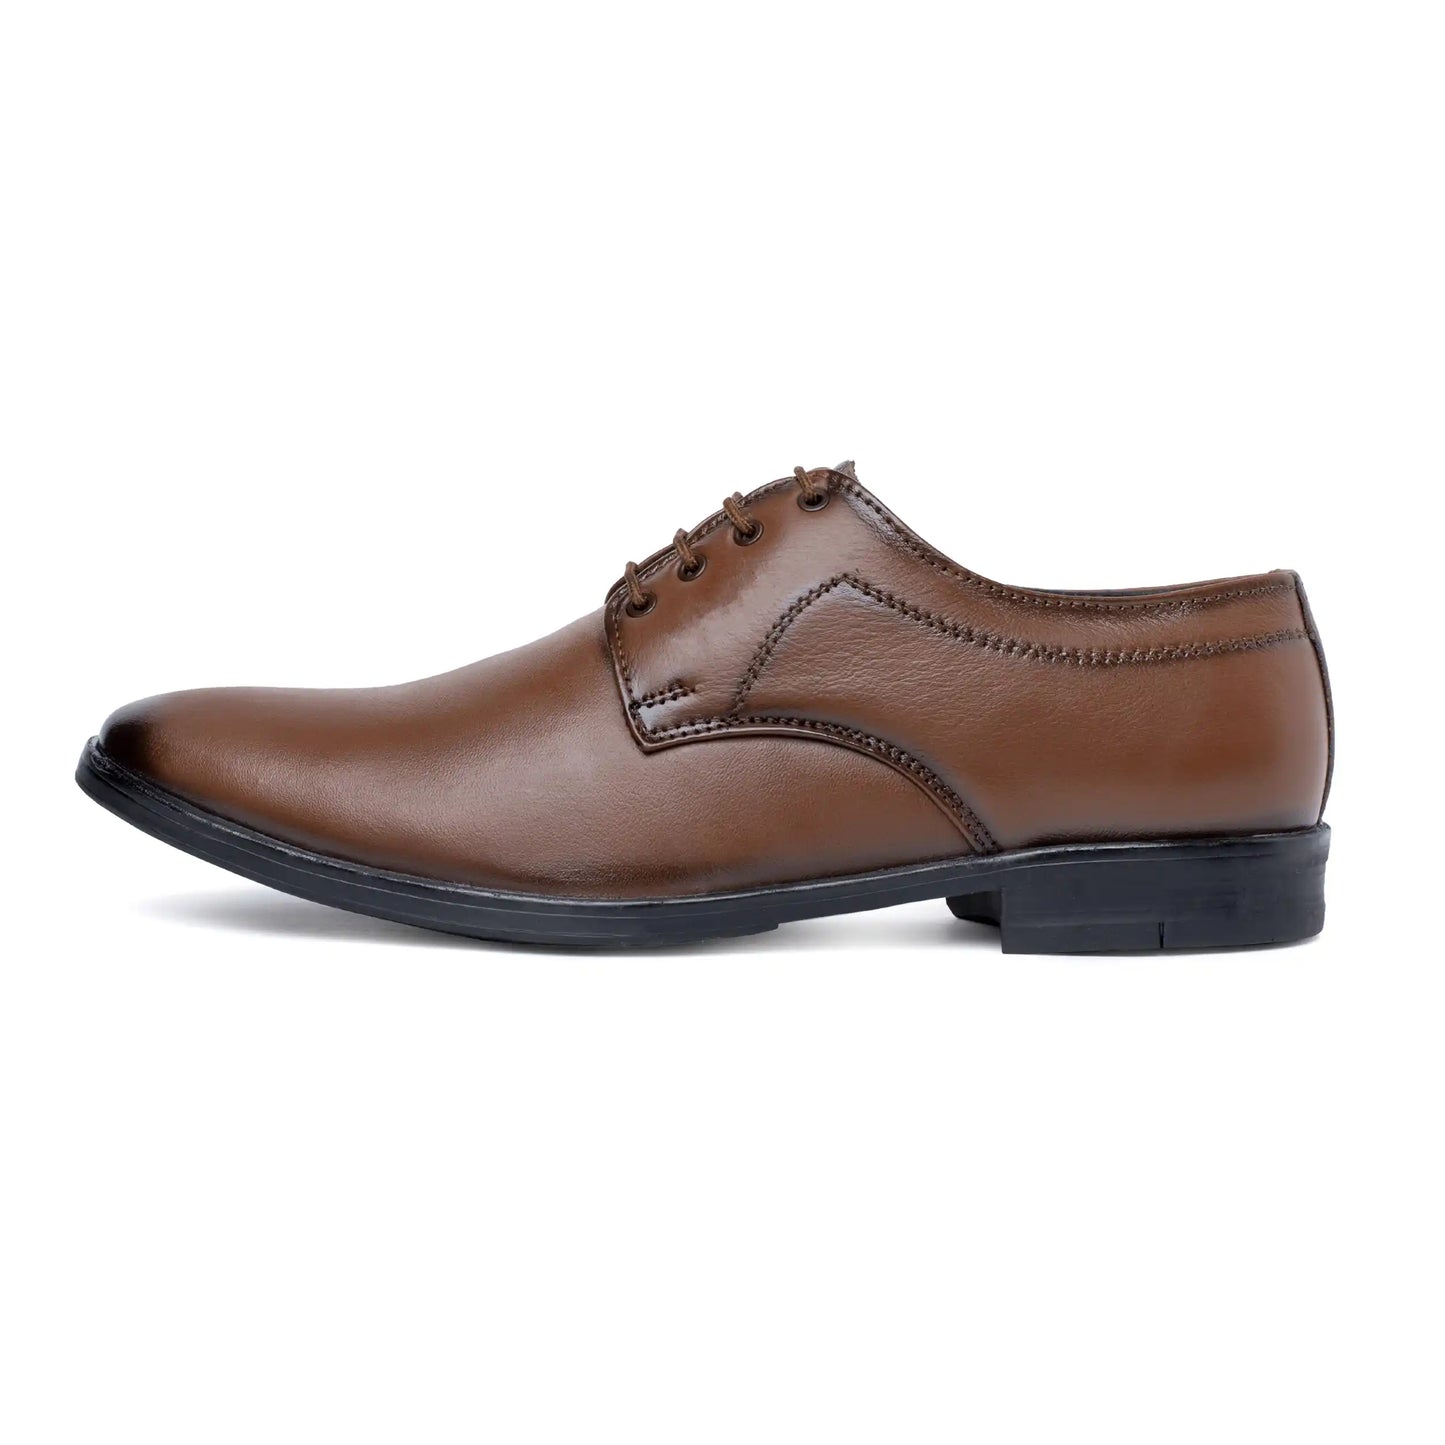 Genuine Leather Formal Shoes Lace Up